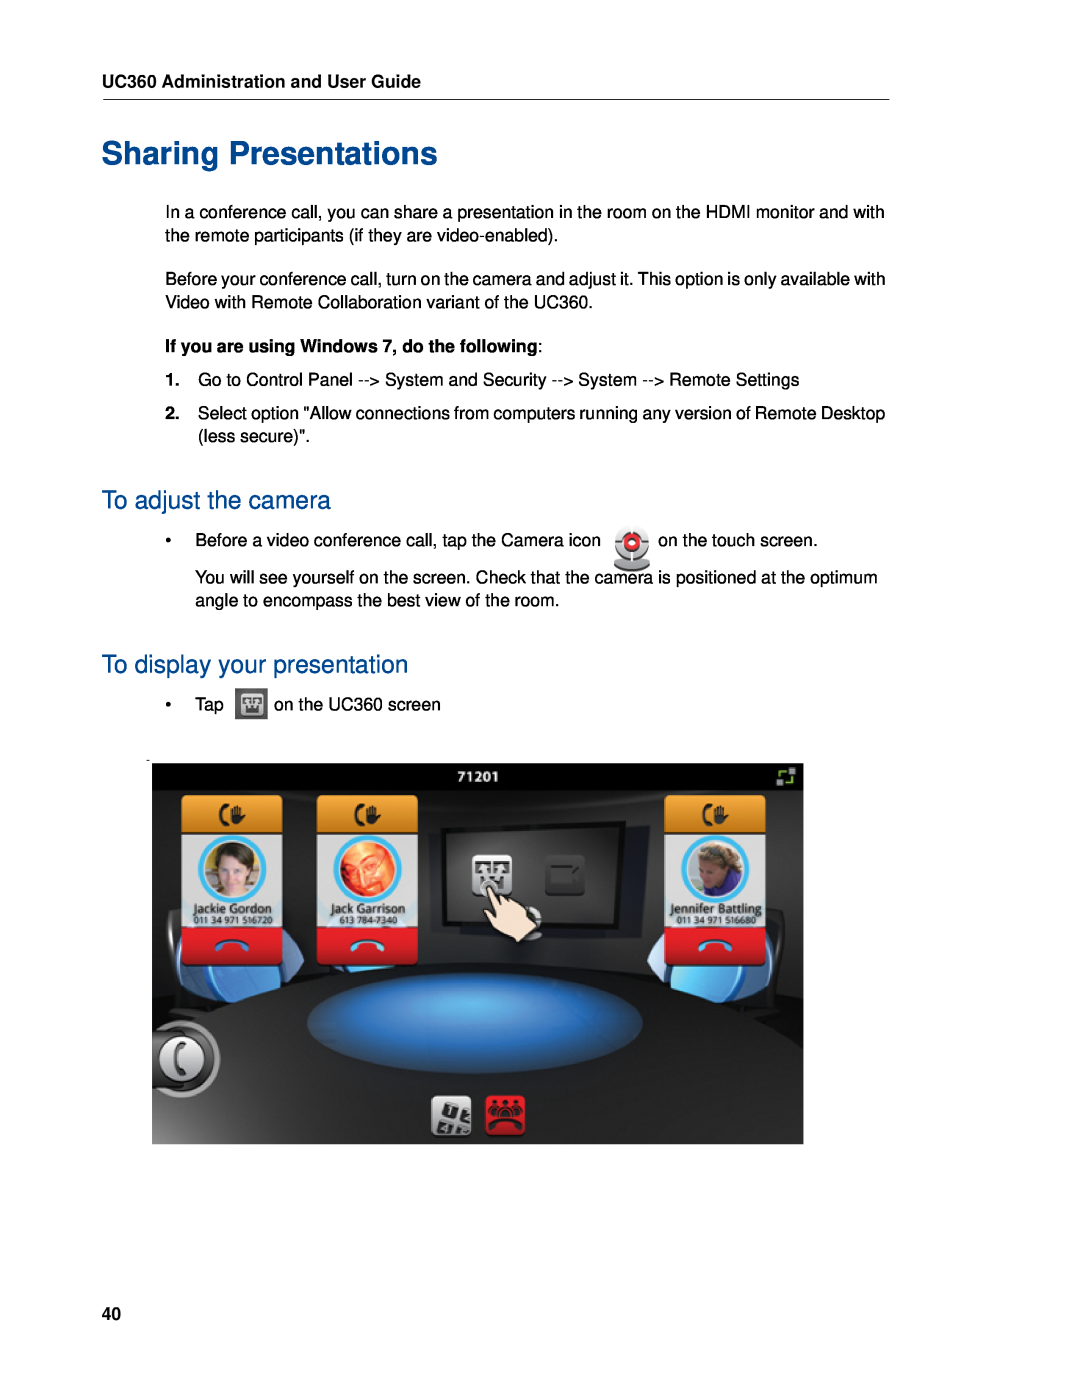 Mitel Sharing Presentations, To adjust the camera, To display your presentation, UC360 Administration and User Guide 